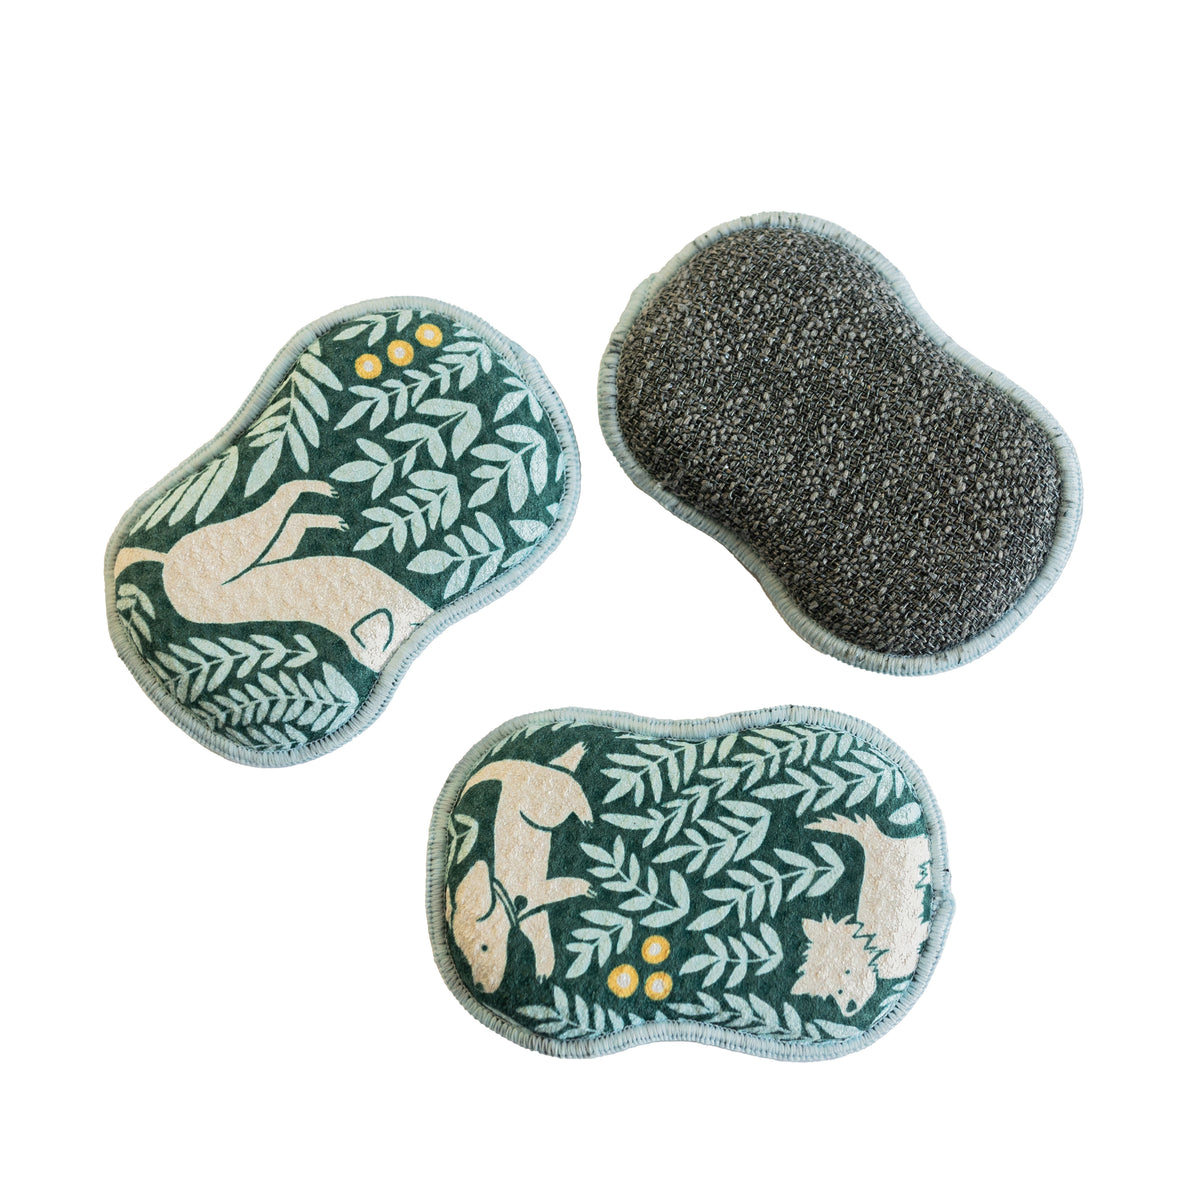 RE:usable Sponges (Set of 3) - Nuthatch Dog Park Sponges &amp; Scouring Pads Once Again Home Co.   